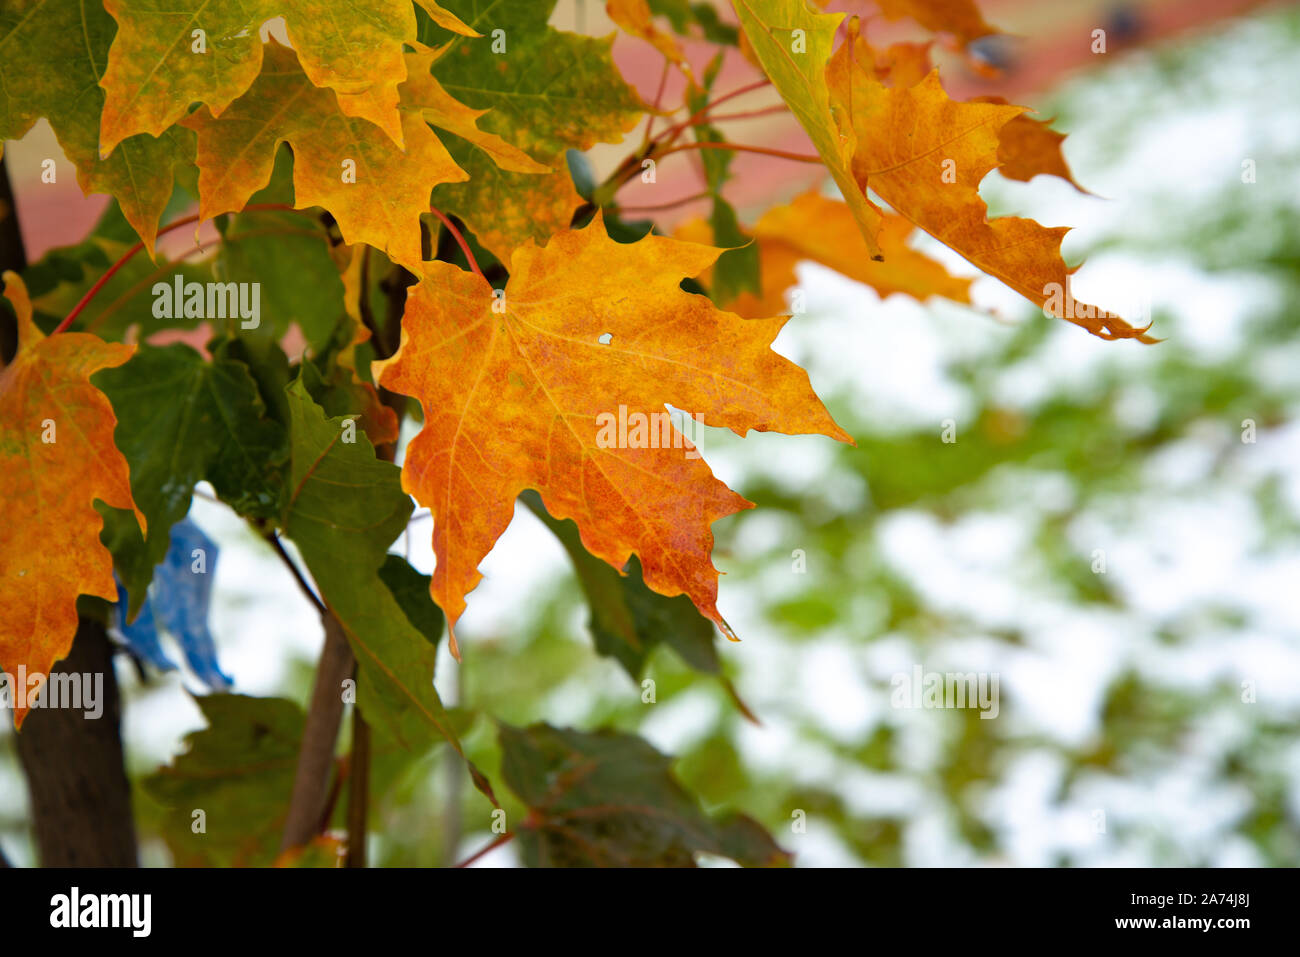 Beautiful branch with orange and yellow leaves in late fall or early winter under the snow. Stock Photo